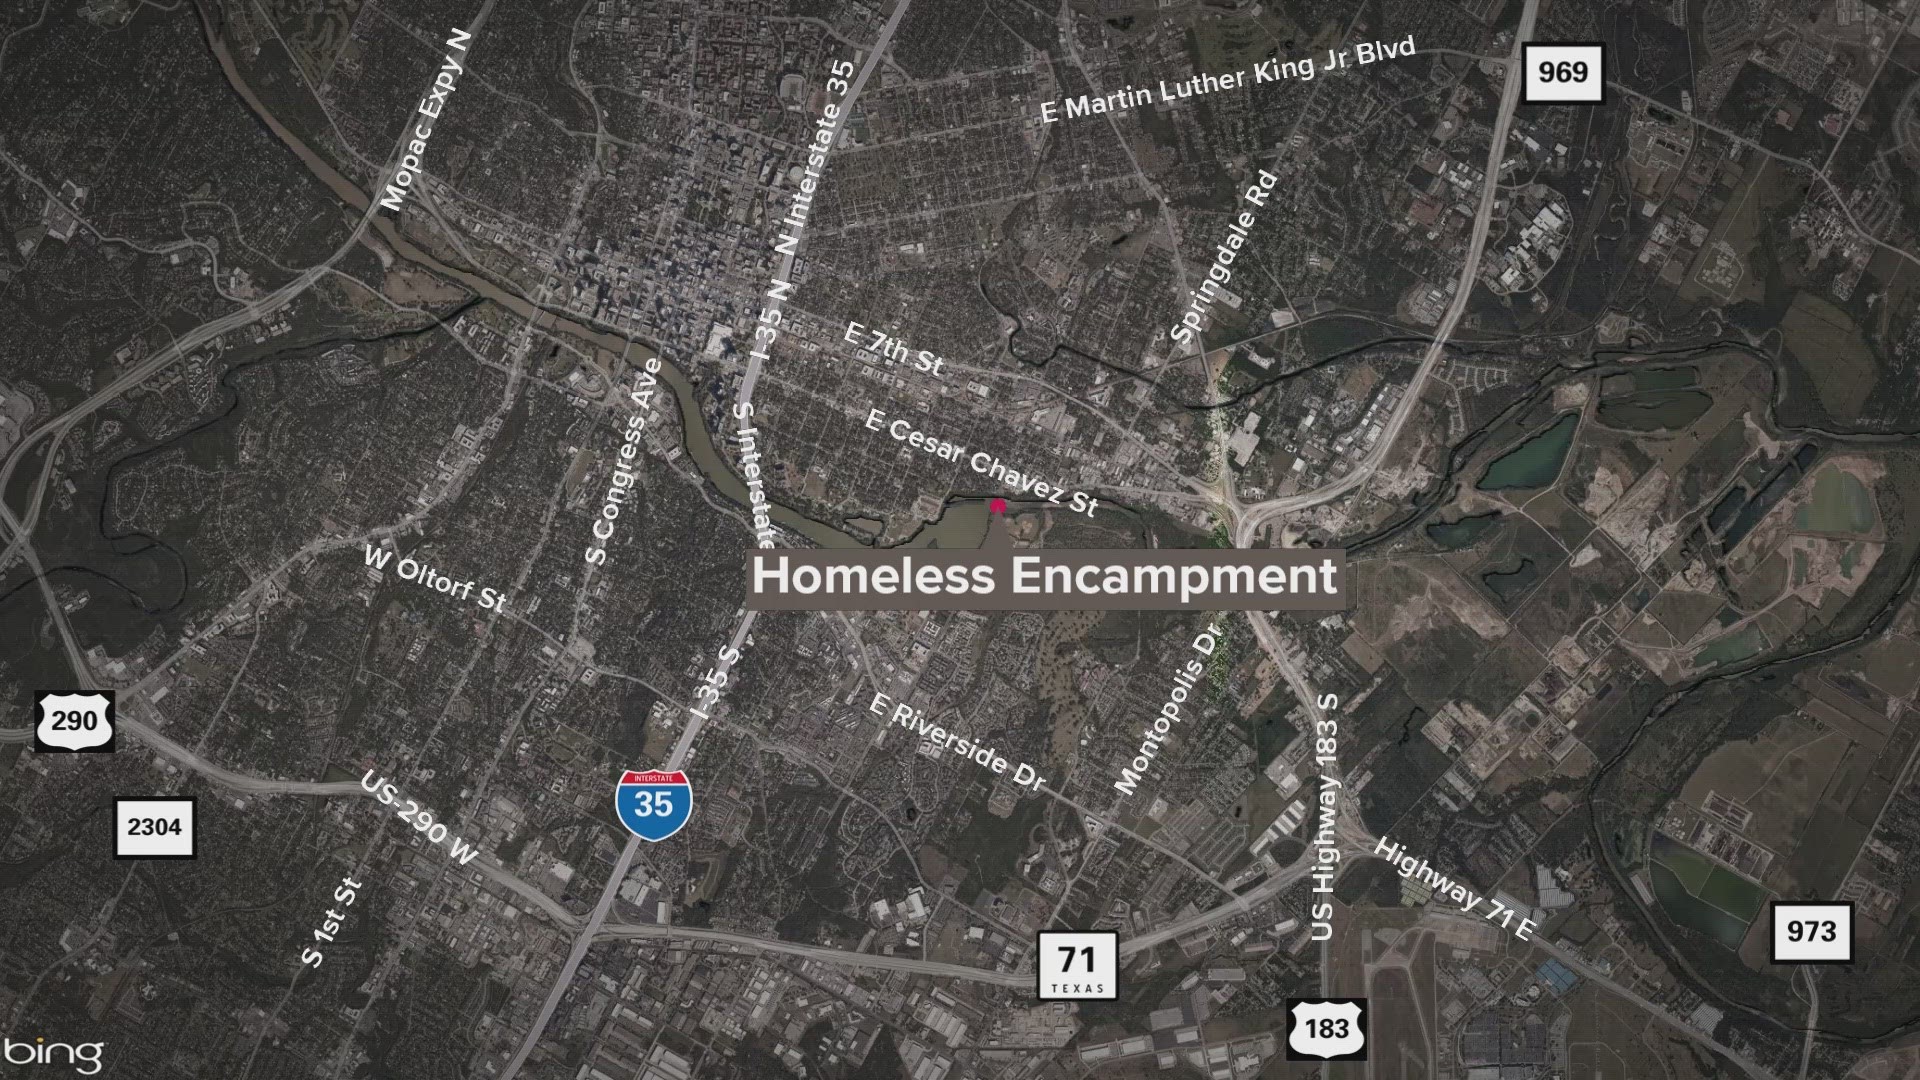 The City of Austin said 33 homeless people were moved from an encampment to a city-owned shelter.